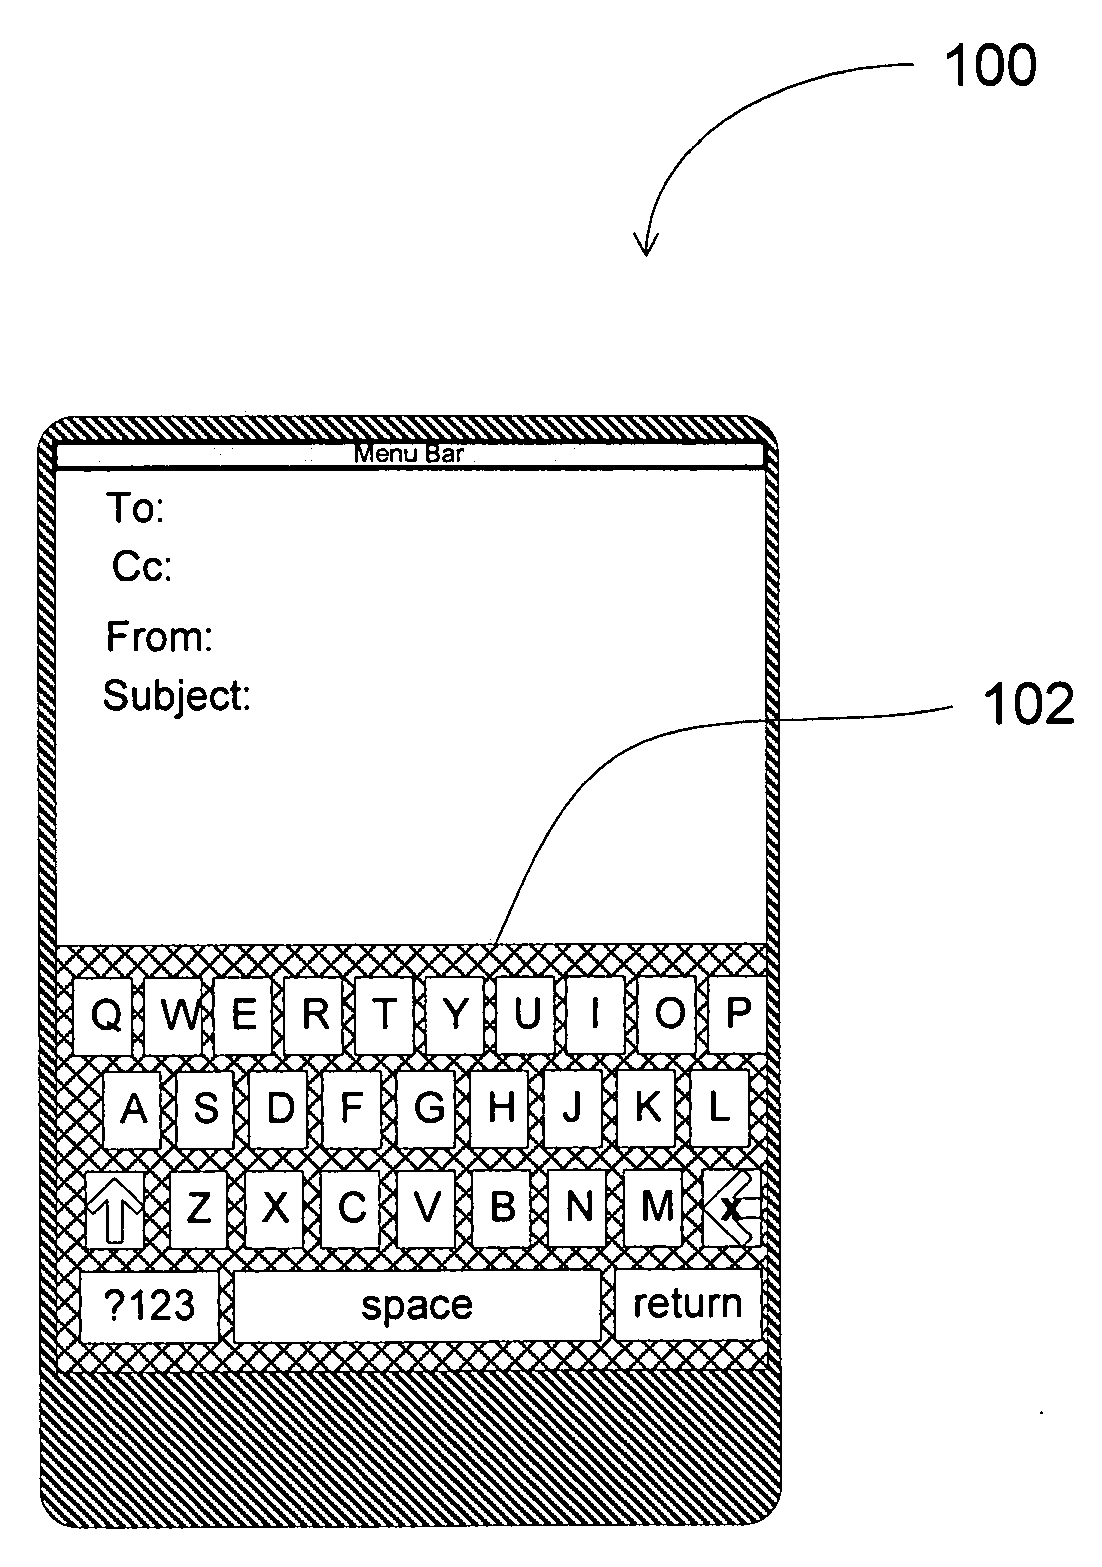 System, method and computer readable media for enabling a user to quickly identify and select a key on a touch screen keypad by easing key selection